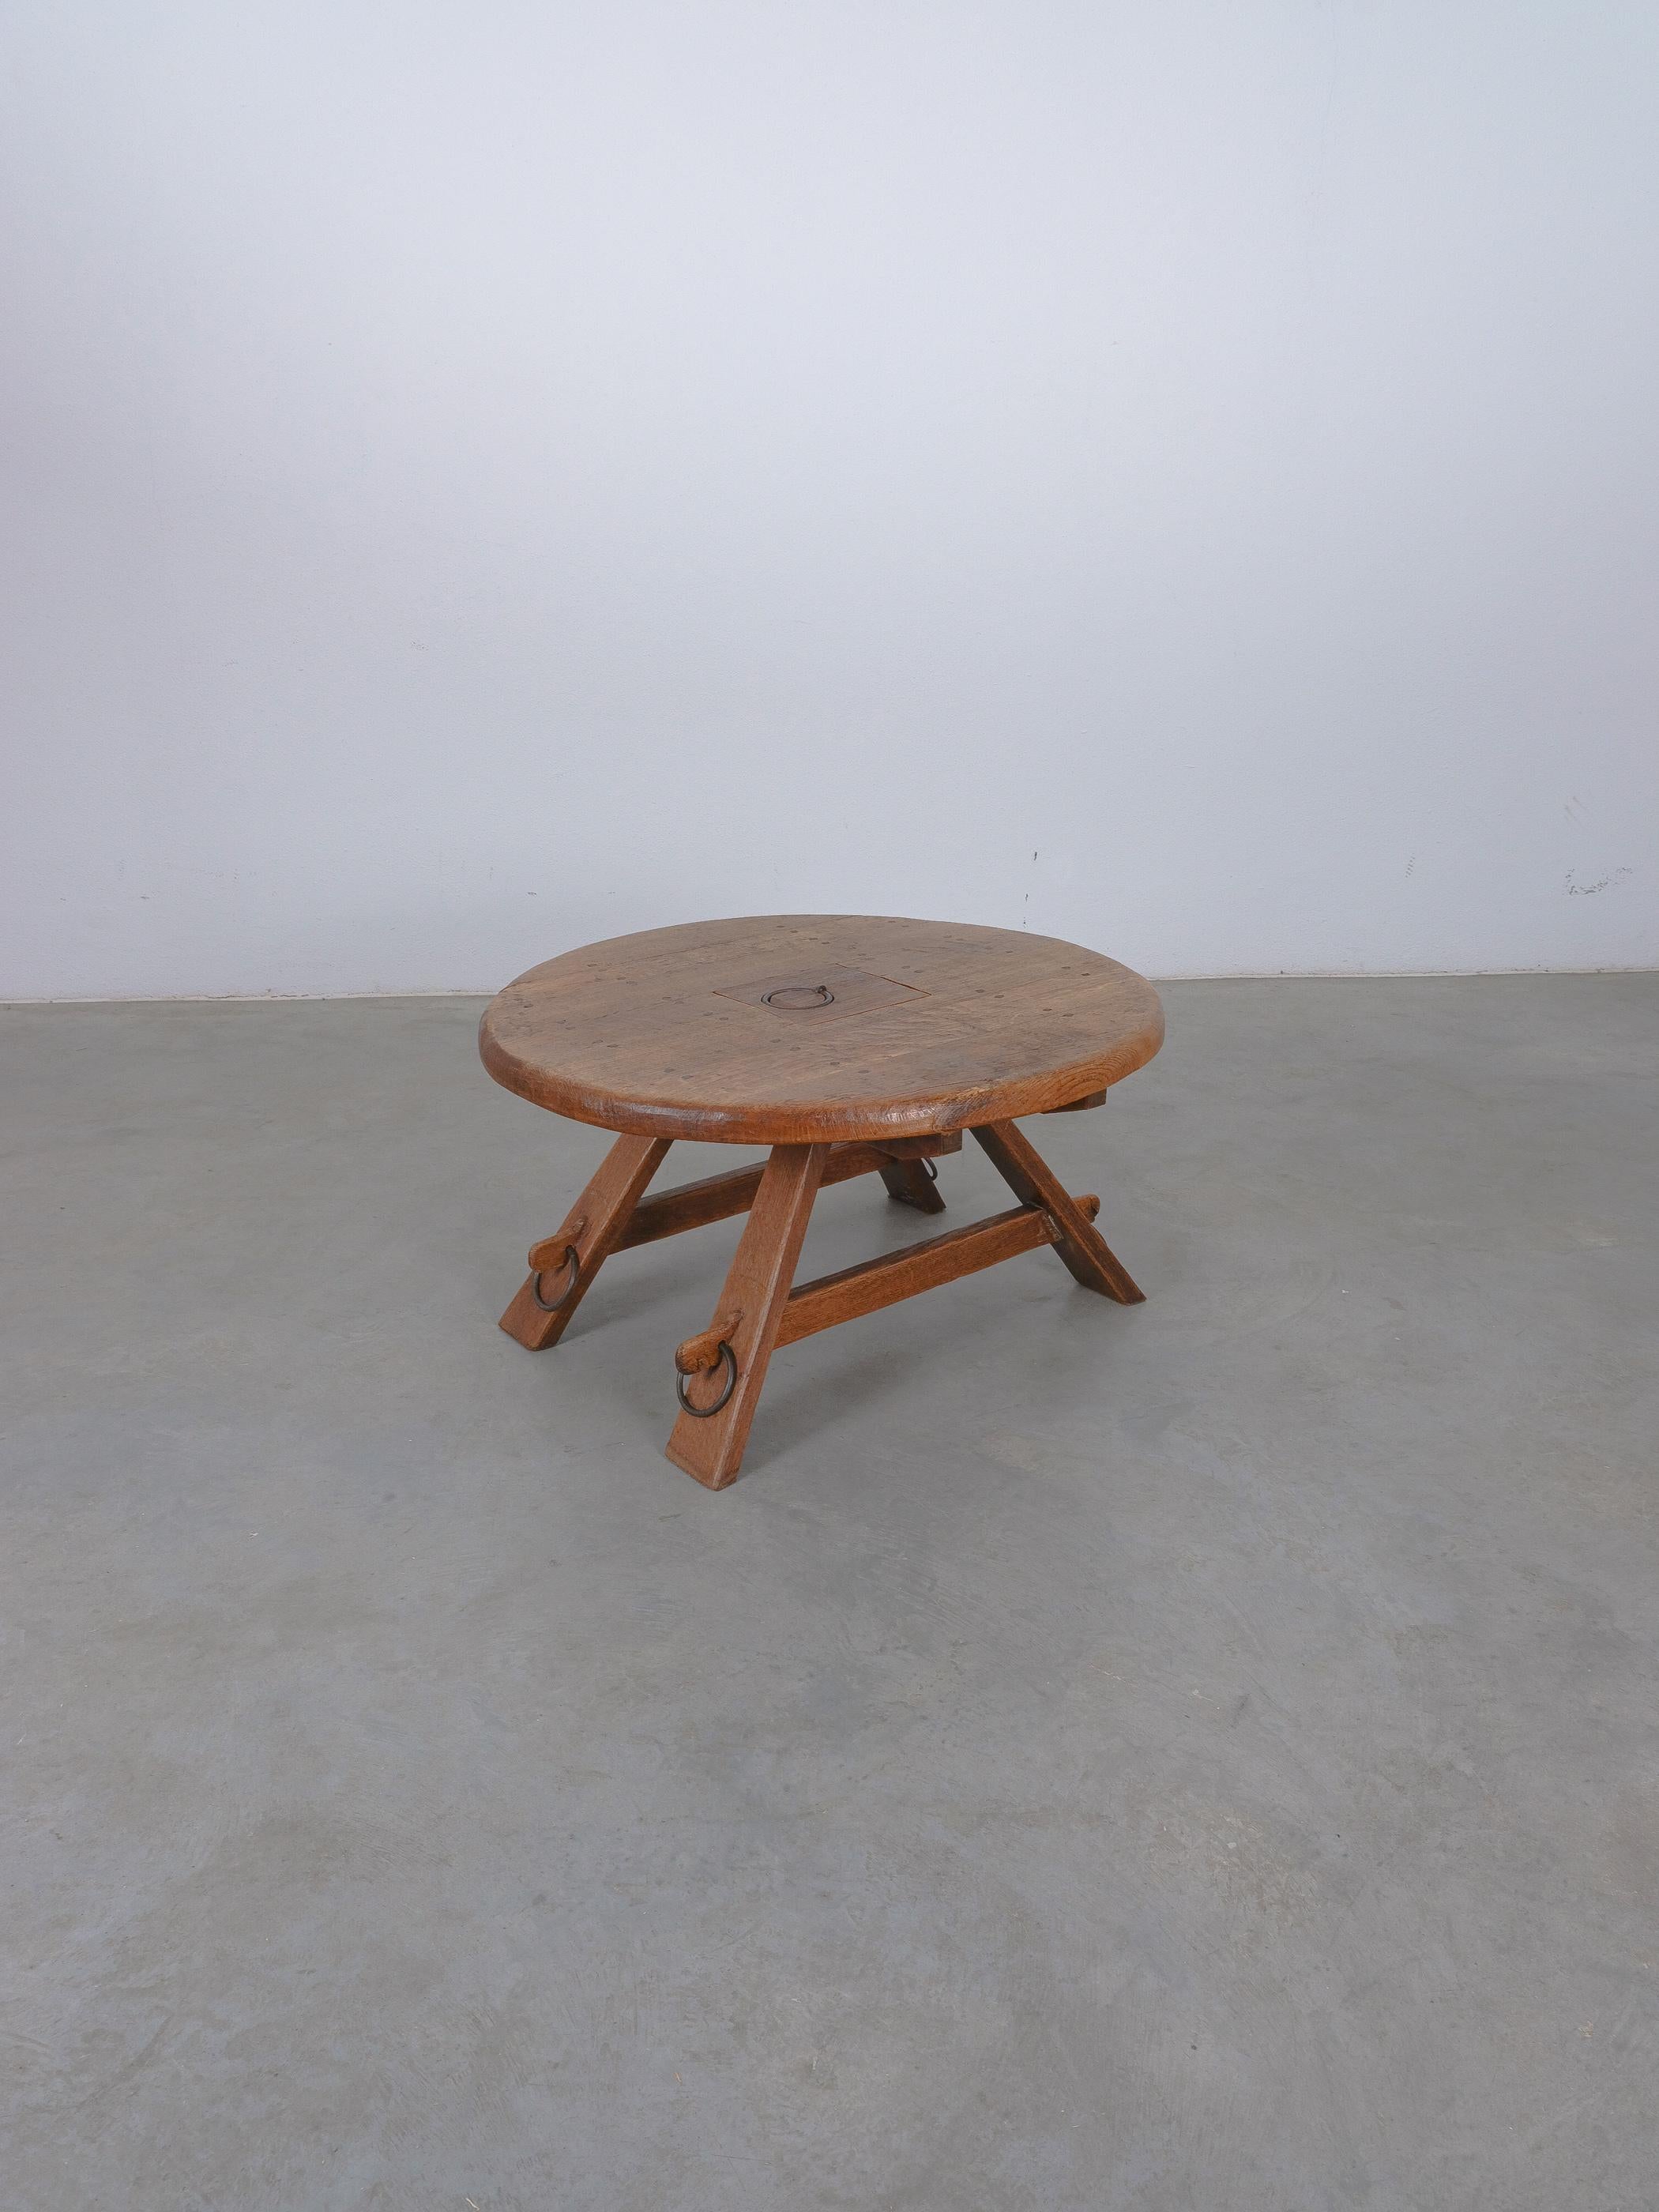 Mid-20th Century Brutalist Oak Coffee Table Carved Wood Artisan with Iron Details, France, 1950 For Sale